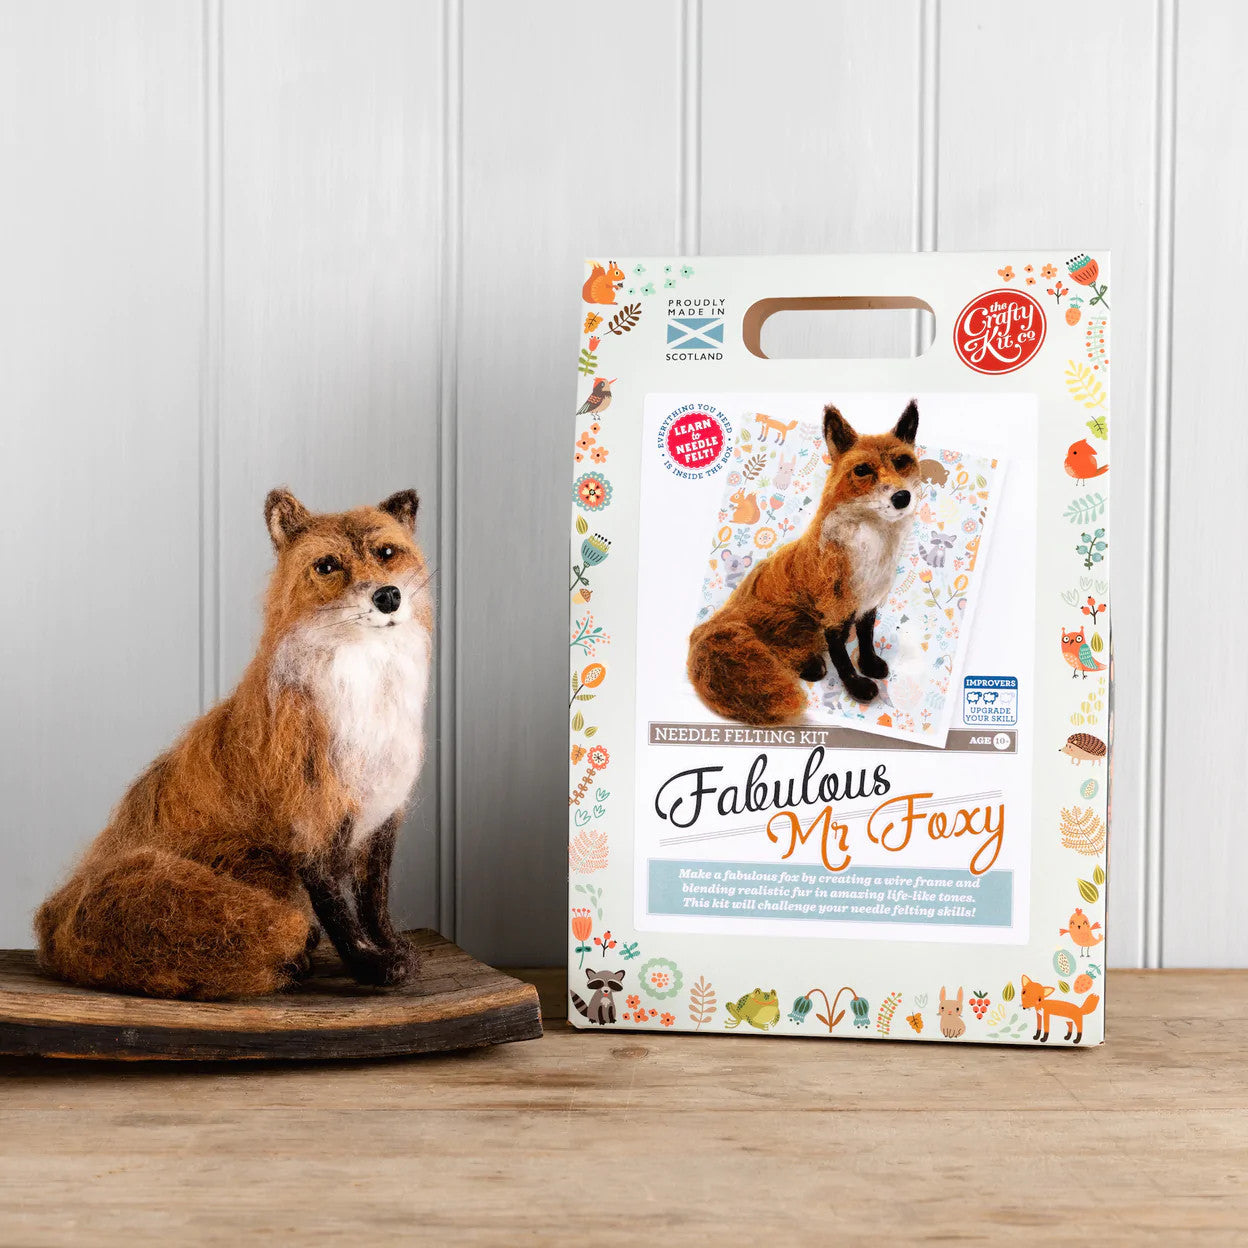 Fabulous Mr Foxy Needle Felting Kit from The Crafty Kit Co. Made in Scotland